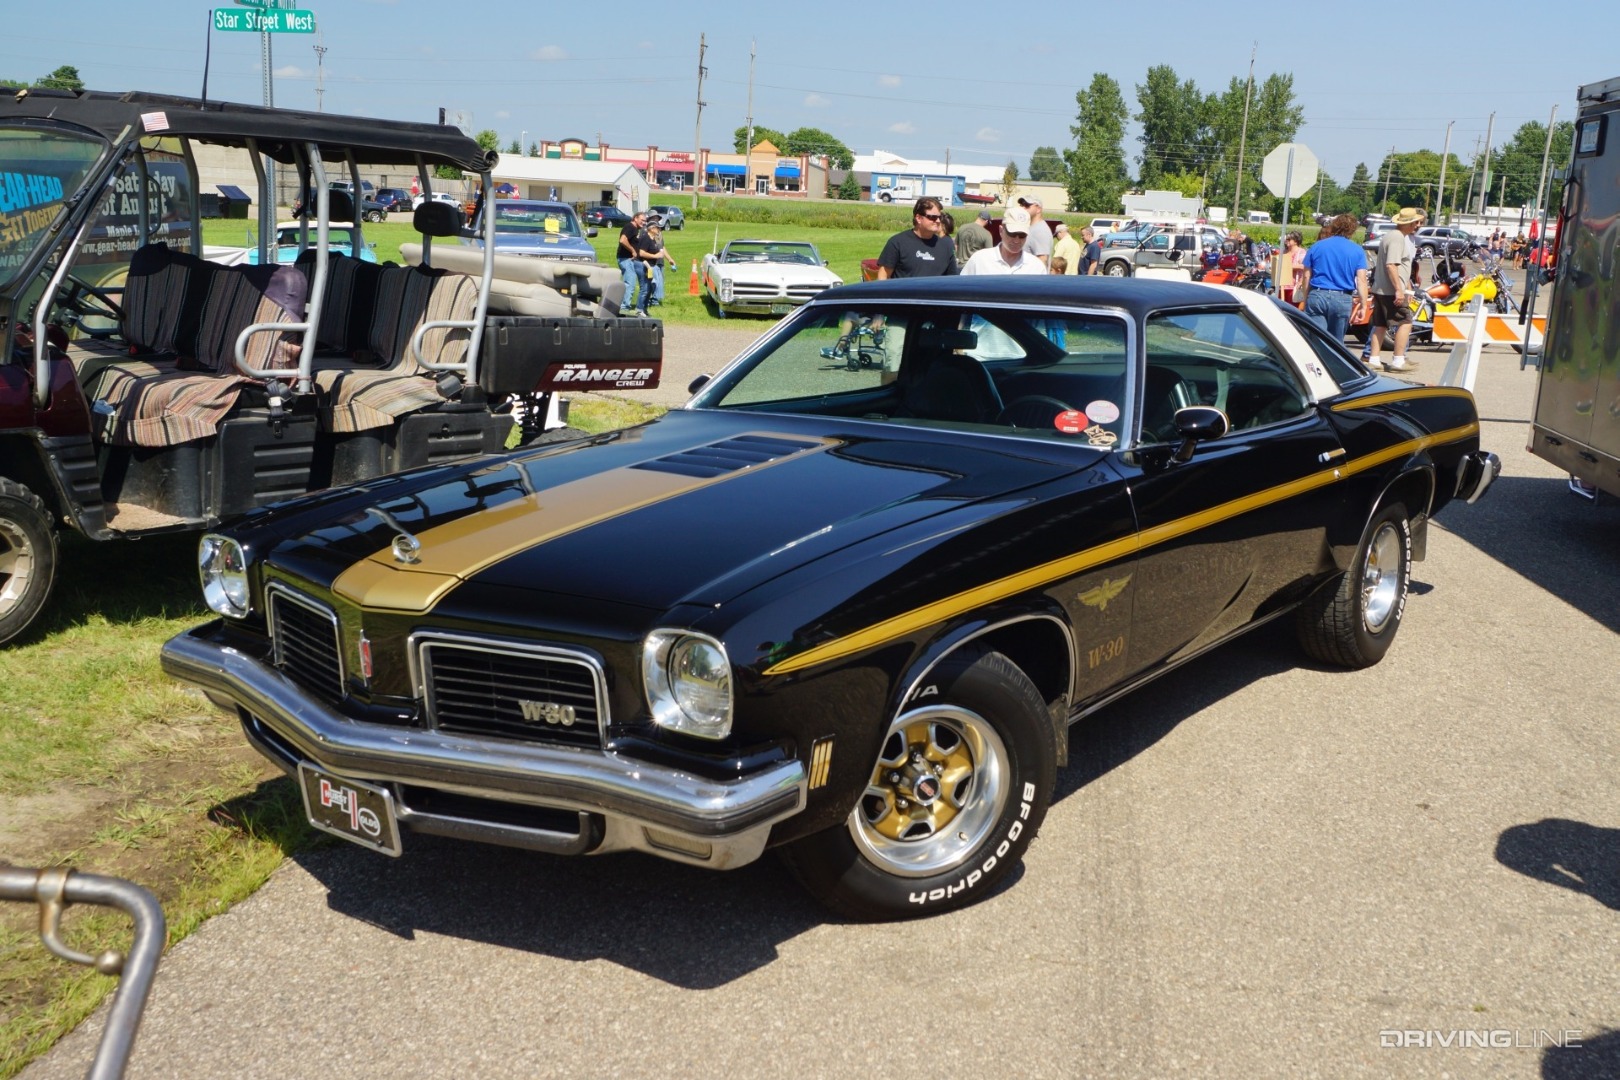 The History Of The 1968-1984 Hurst/Olds, Detroit's Classiest Muscle Ca...